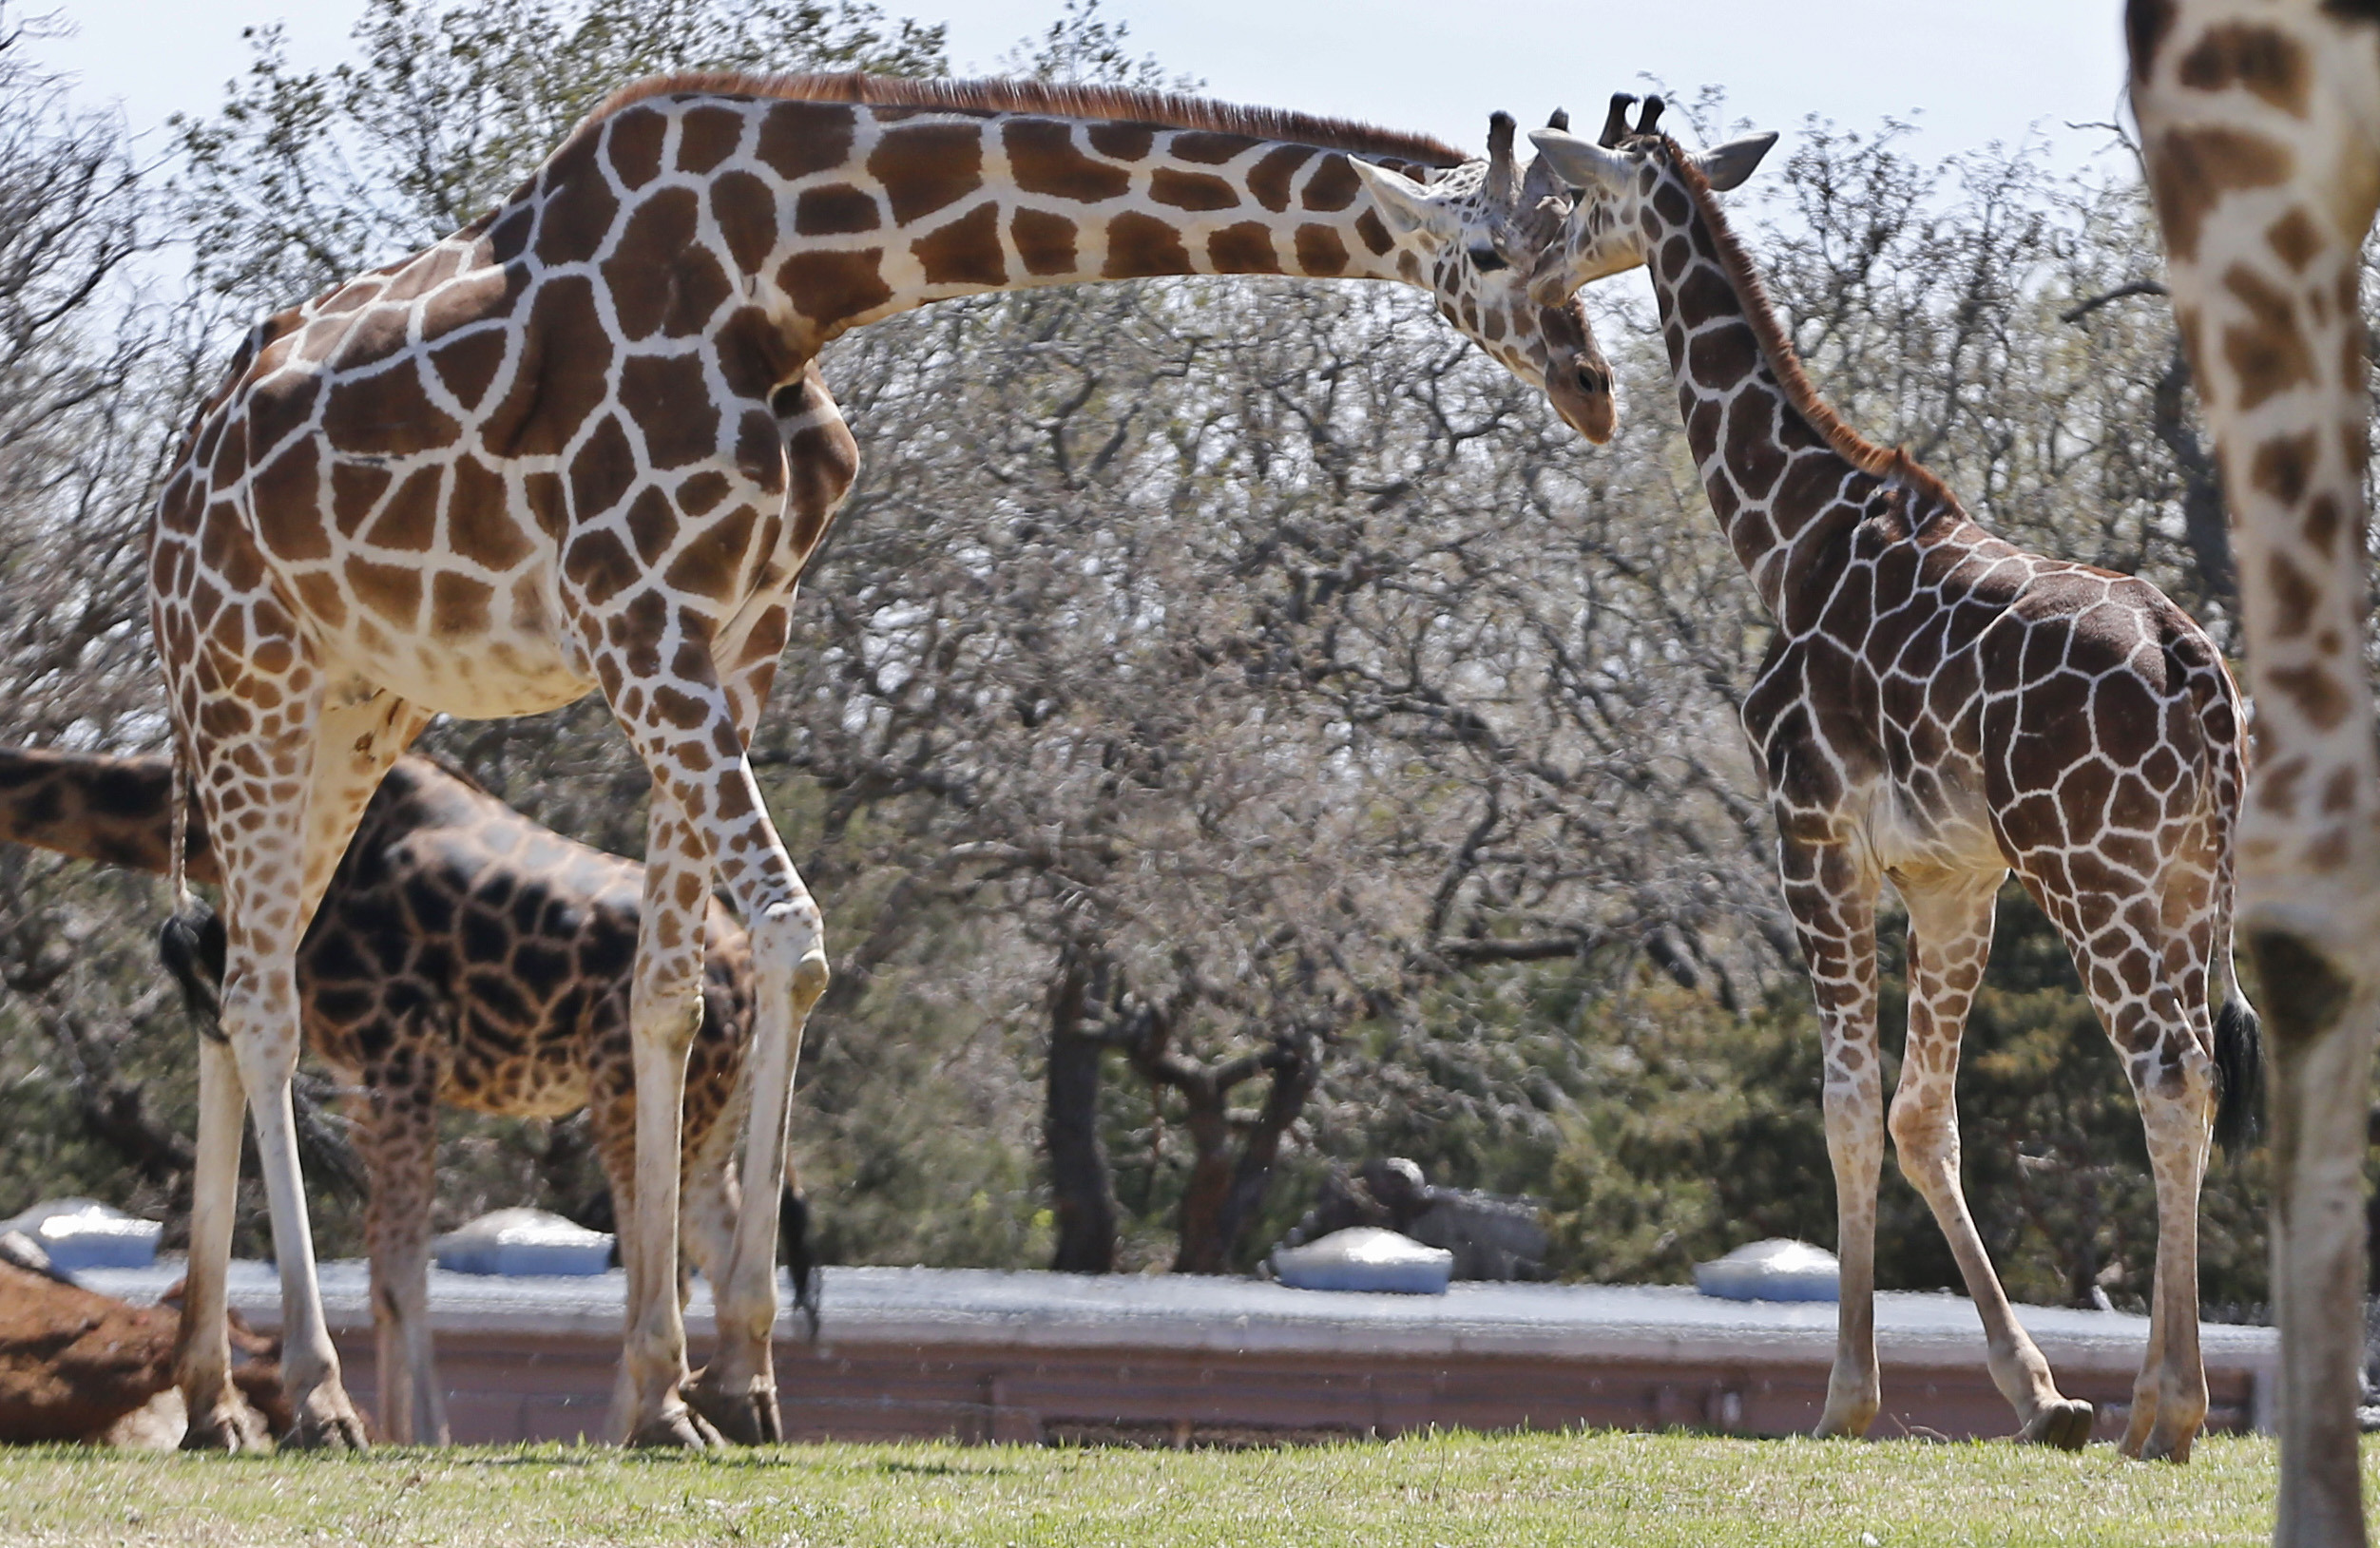 PHOTO: Six-month-old Kyah, a giraffe at the Oklahoma City Zoo, stands next to her mother, Ellie, at the zoo in Oklahoma City, April 4, 2014.